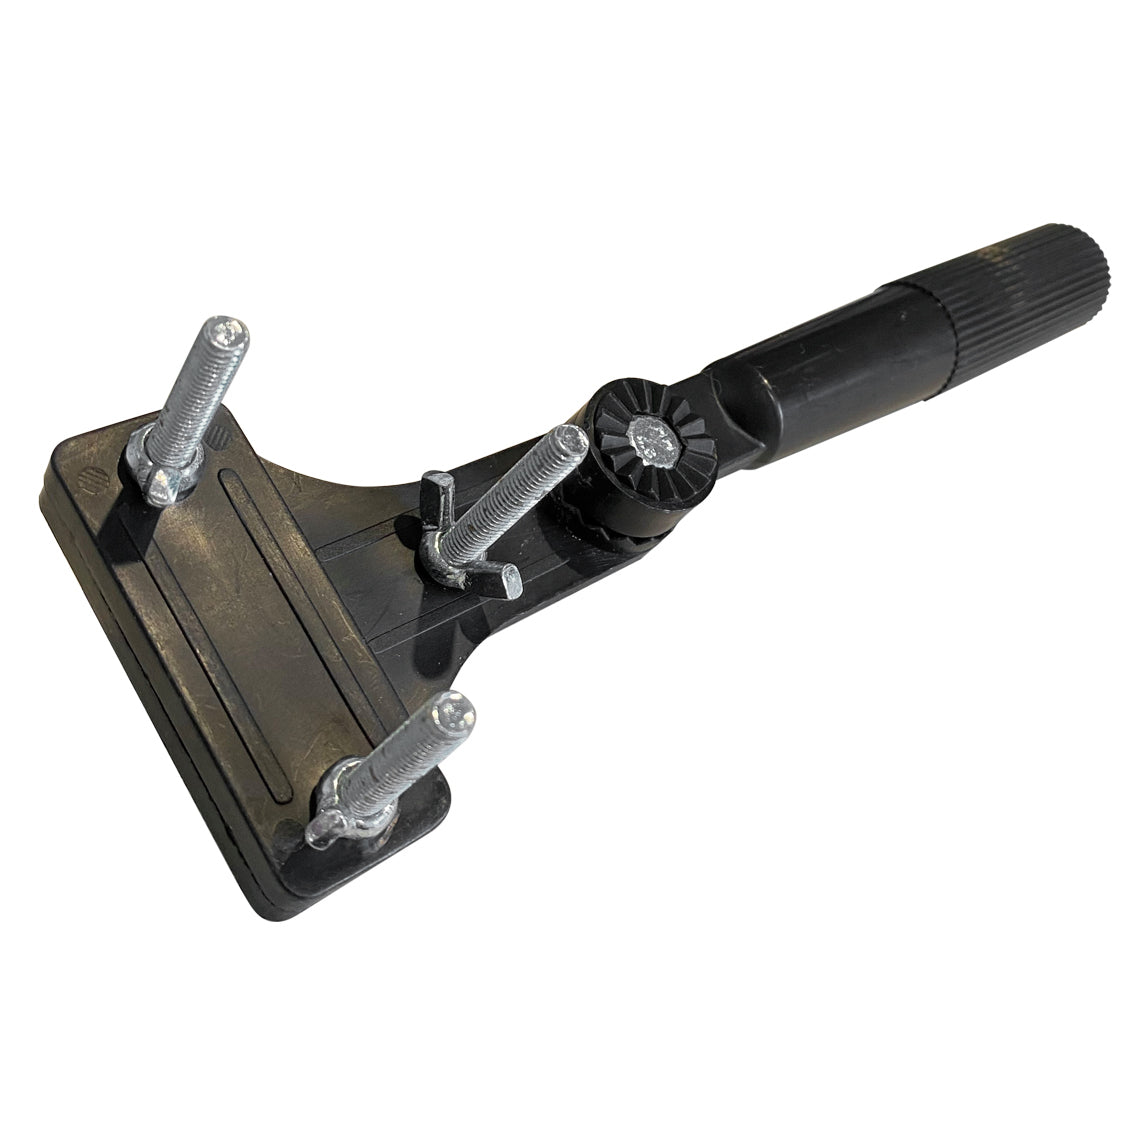 Extension Pole and Brush Clamp